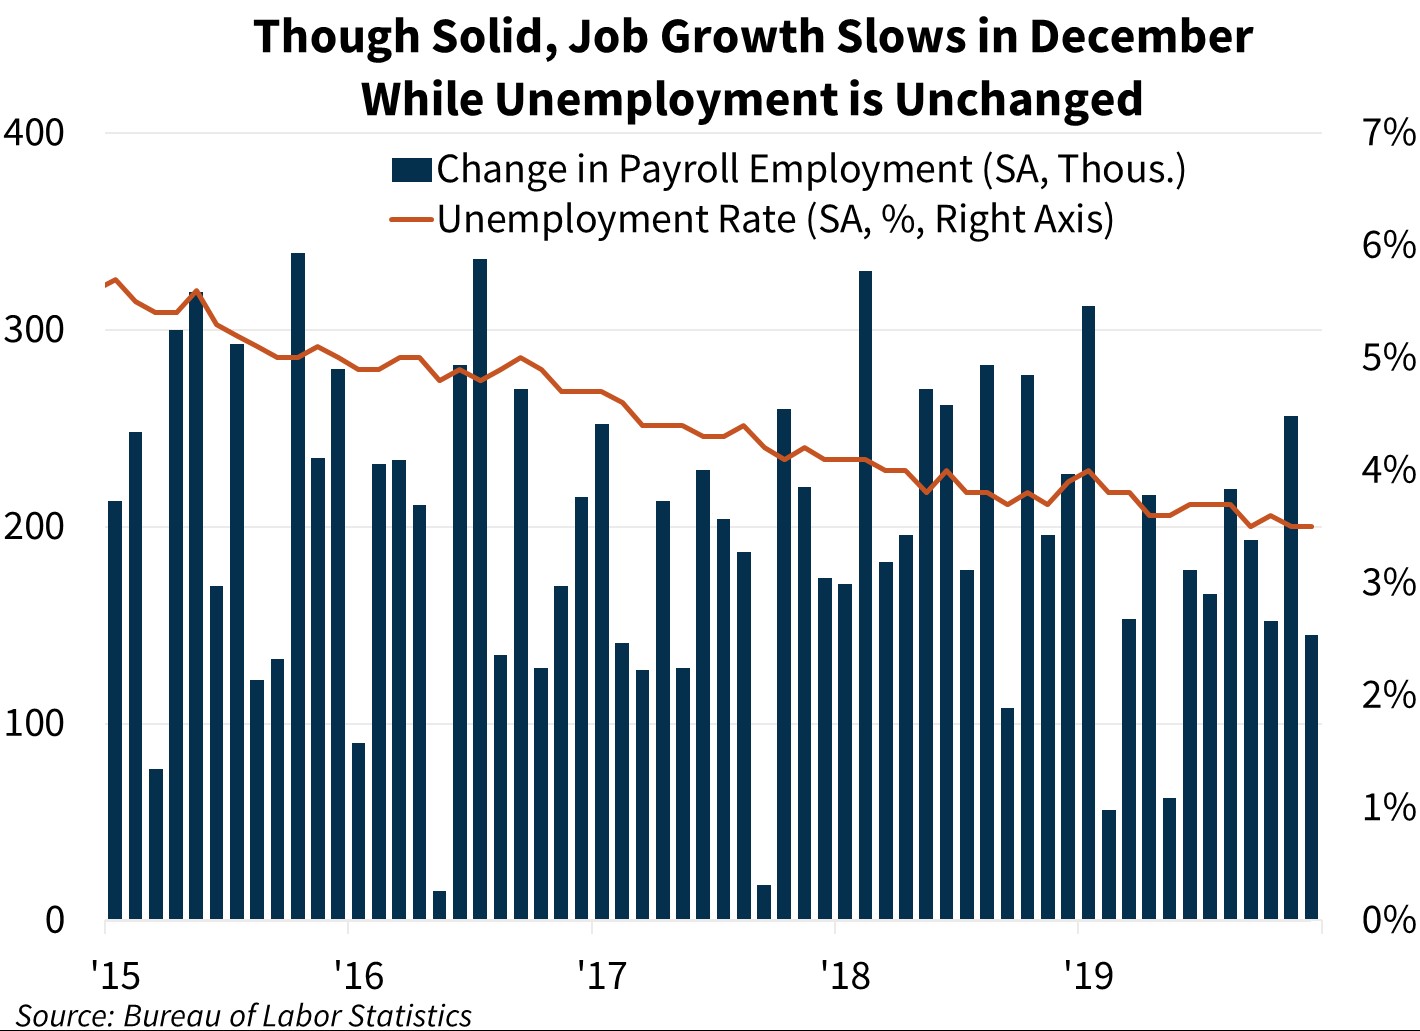 Though Solid, Job Growth Slows in December While Unemployment is Unchanged